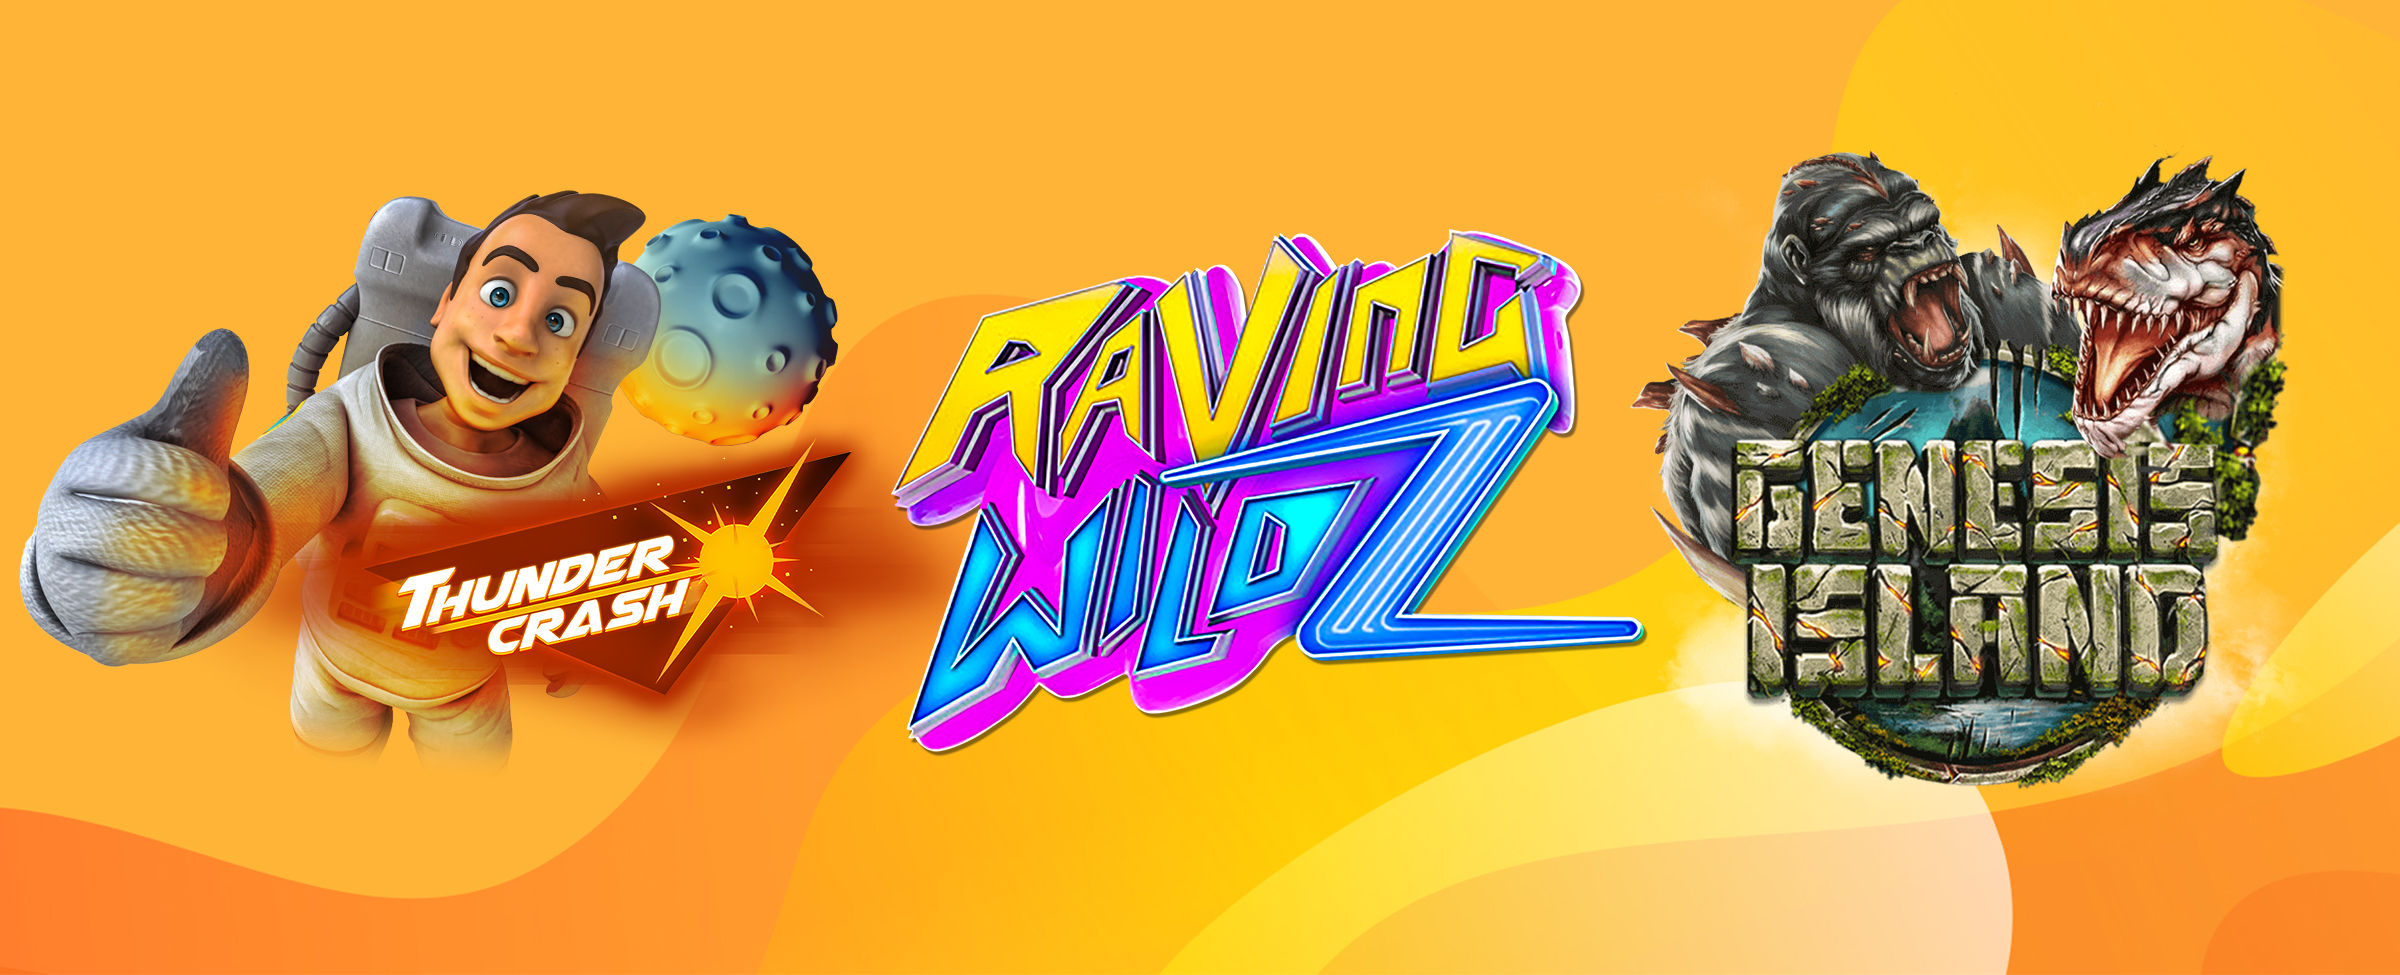 Now onto some of our most popular new slot games at SlotsLV: Thundercrash, Raving Wildz, and Genesis Island. Time to turn the adventure up to 10! 